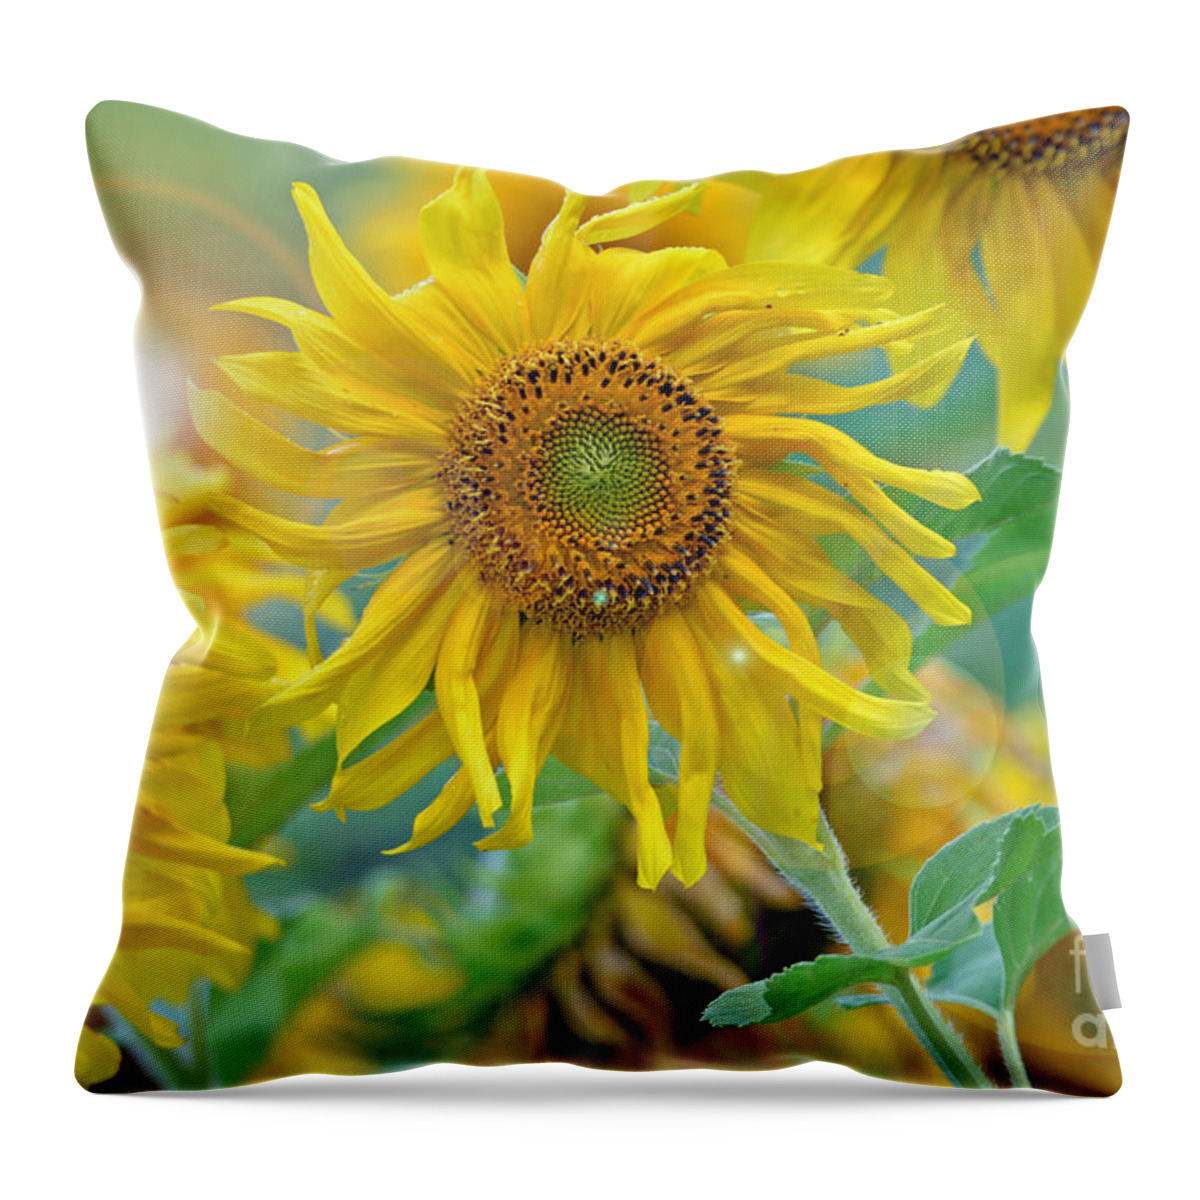 Sunflower Throw Pillow featuring the photograph Sunflower by Lila Fisher-Wenzel